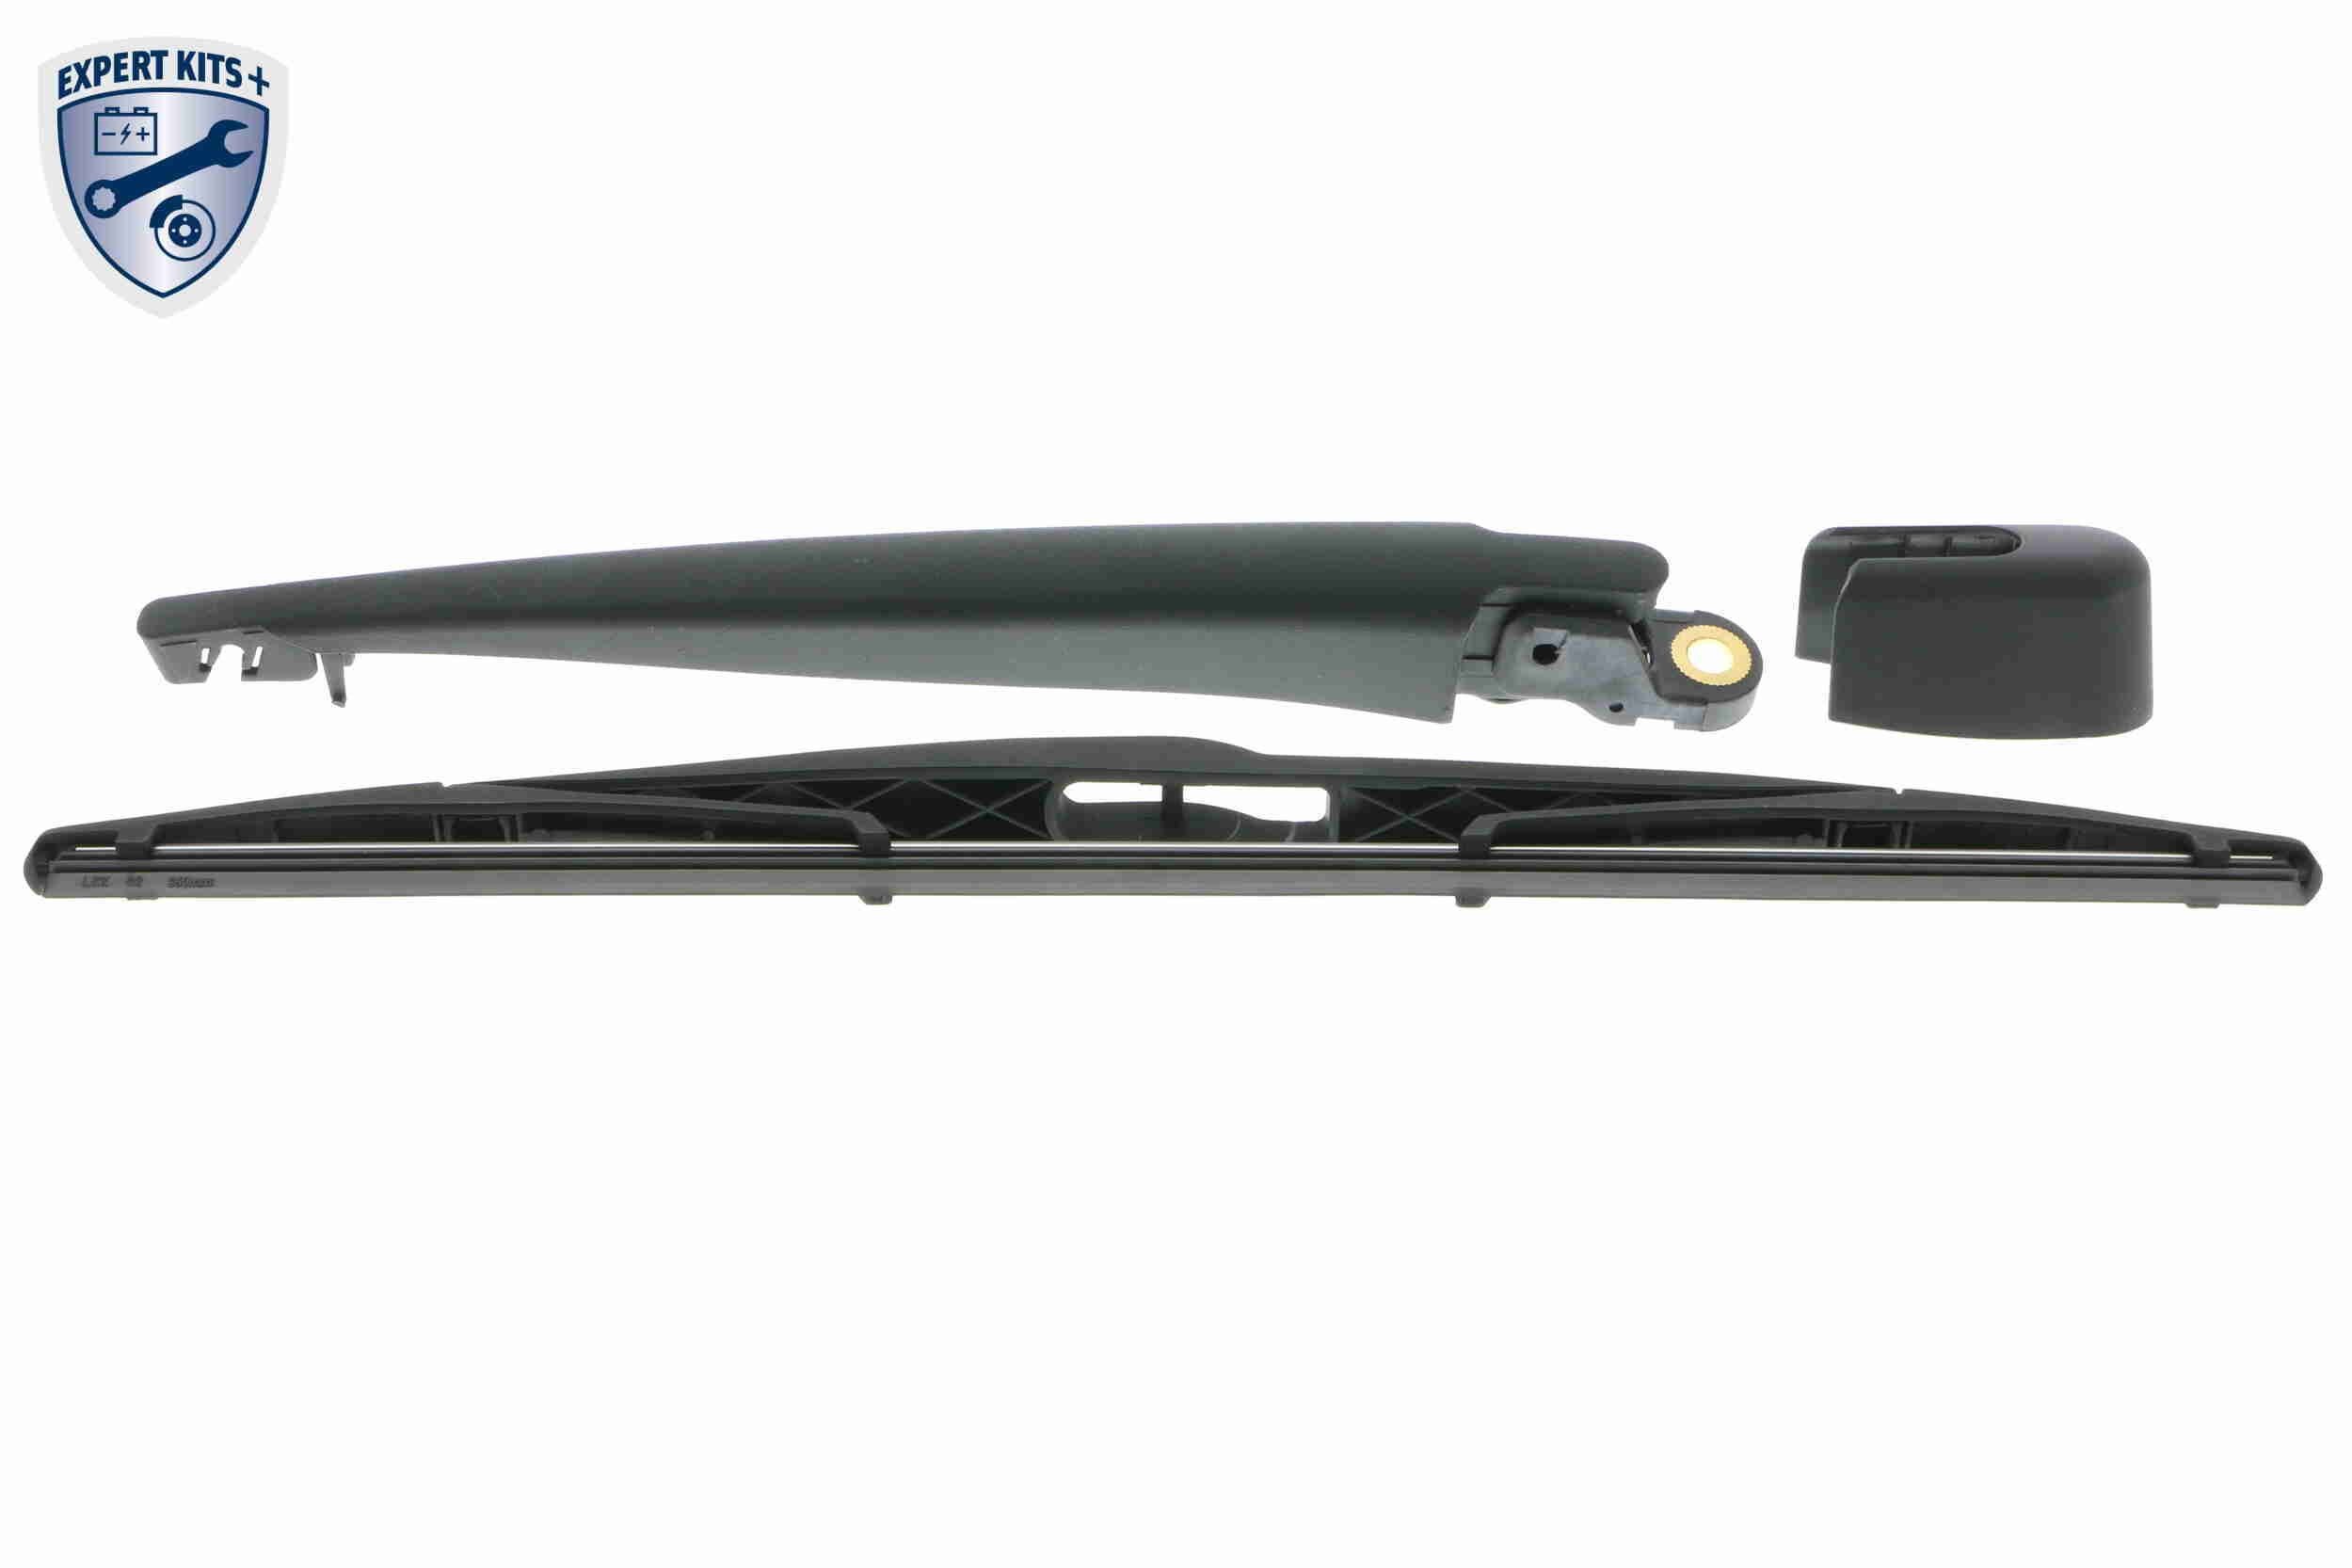 V40-8160 VAICO Windscreen wipers OPEL with cap, with integrated wiper blade, EXPERT KITS +